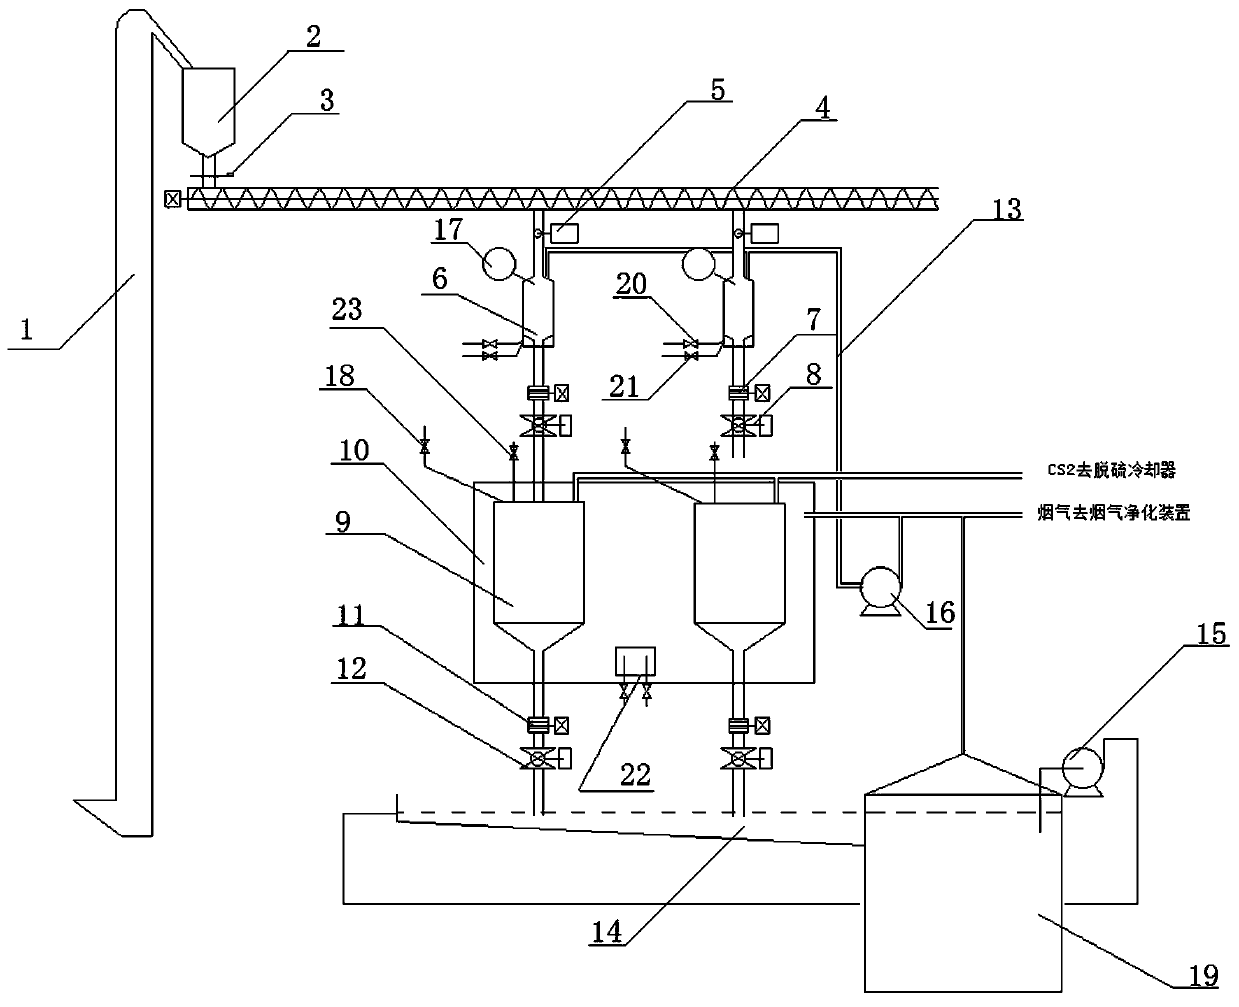 Production equipment and process of CS2 with fully enclosed continuous coke method